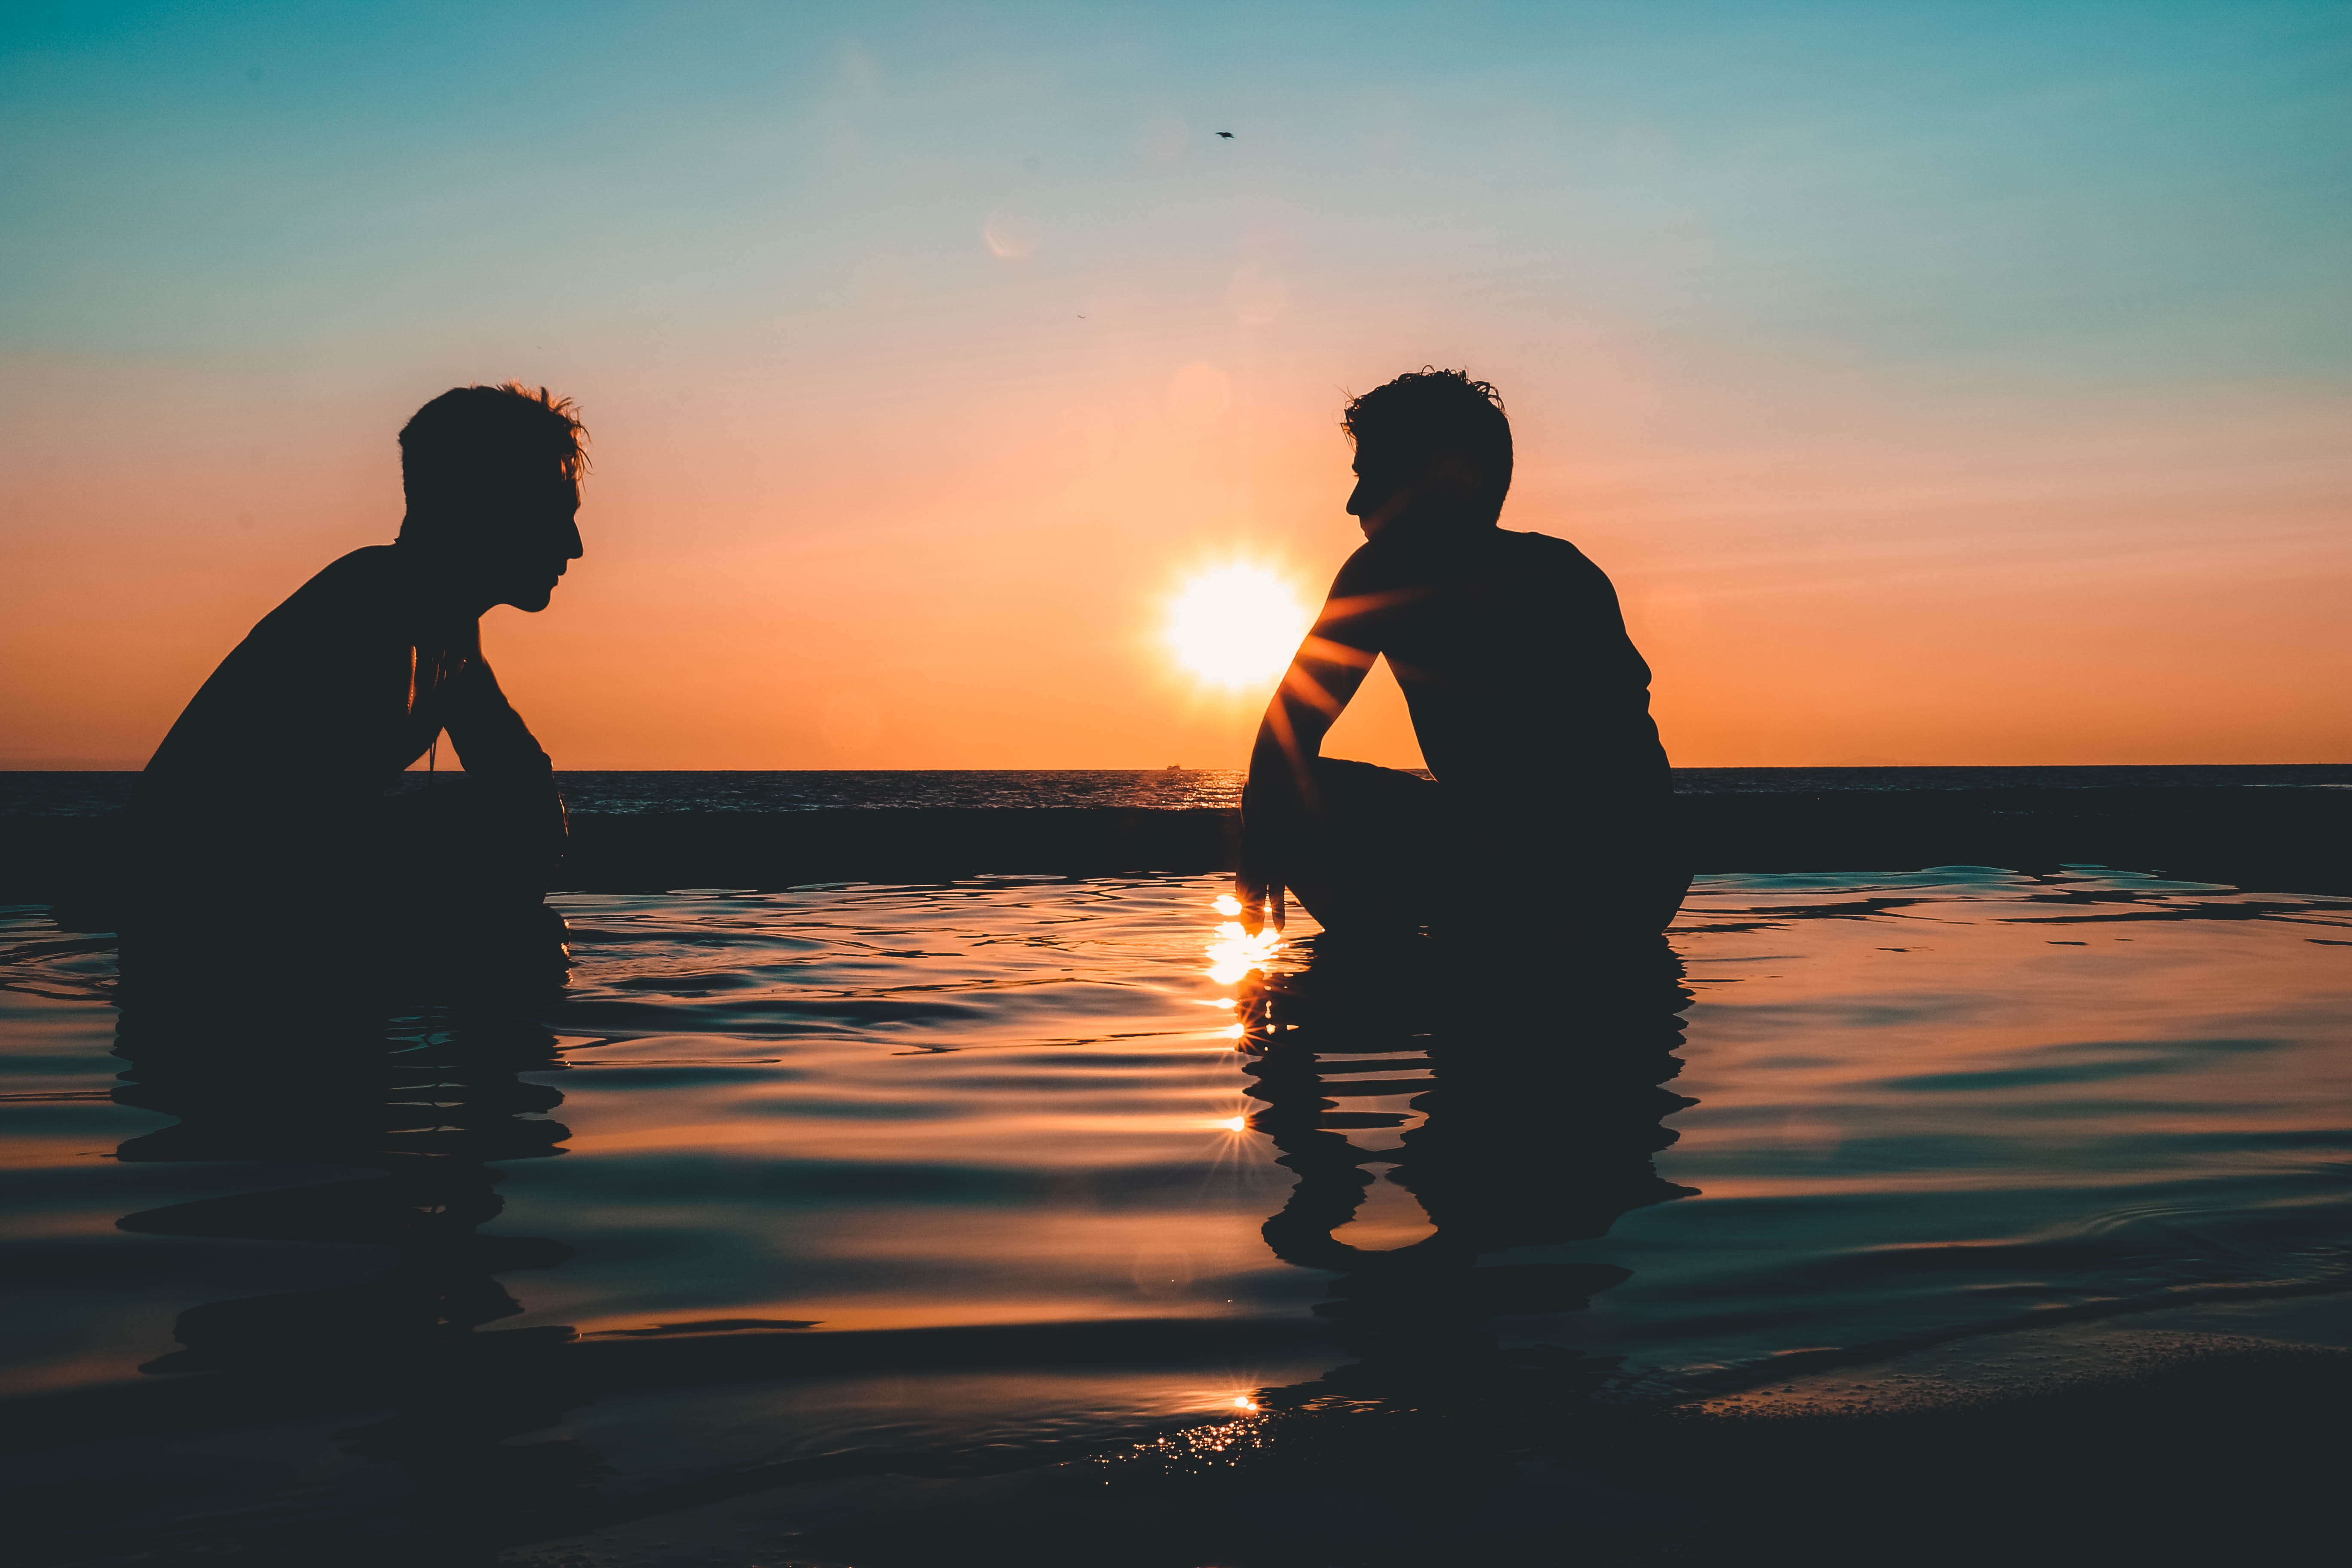 Photo of two men on seashore during sunset